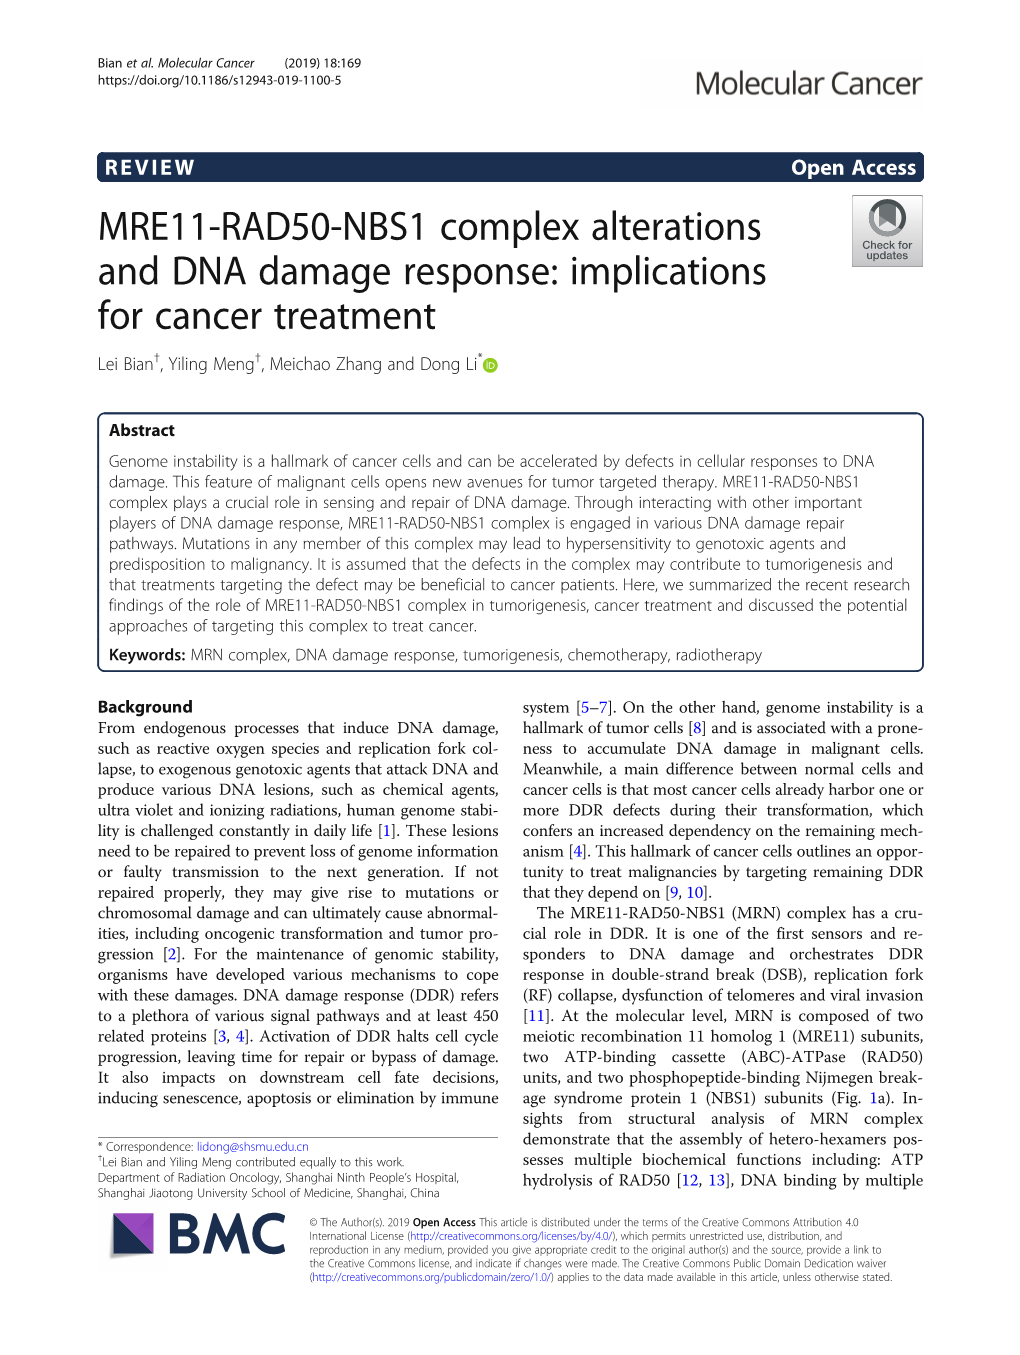 MRE11-RAD50-NBS1 Complex Alterations and DNA Damage Response: Implications for Cancer Treatment Lei Bian†, Yiling Meng†, Meichao Zhang and Dong Li*